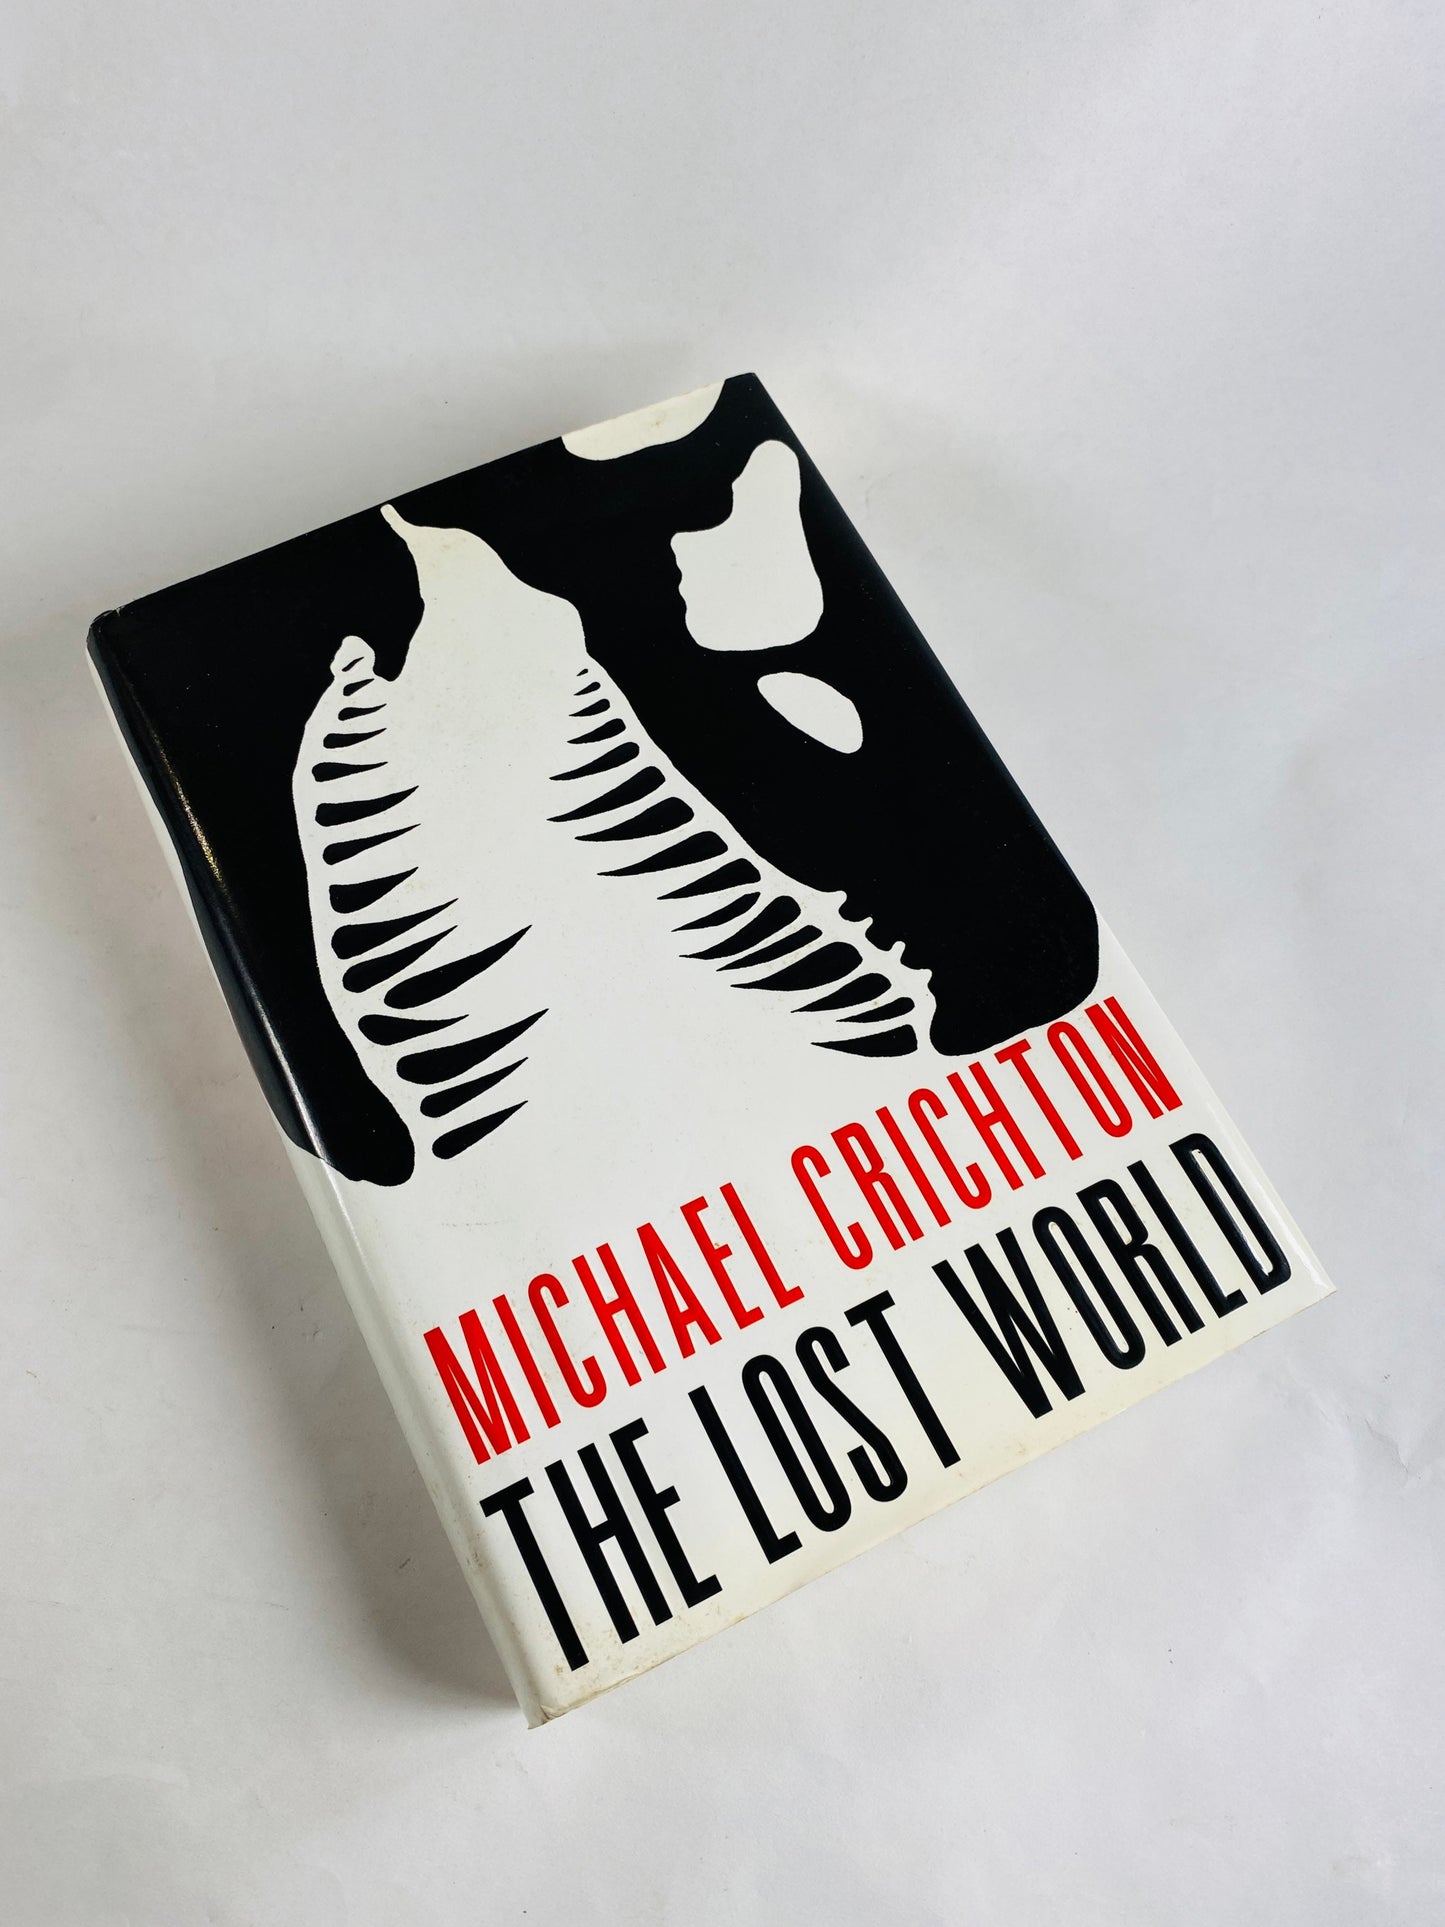 Lost World by Michael Crichton. FIRST Trade EDITION vintage book circa 1995. Sequel to Jurassic Park.